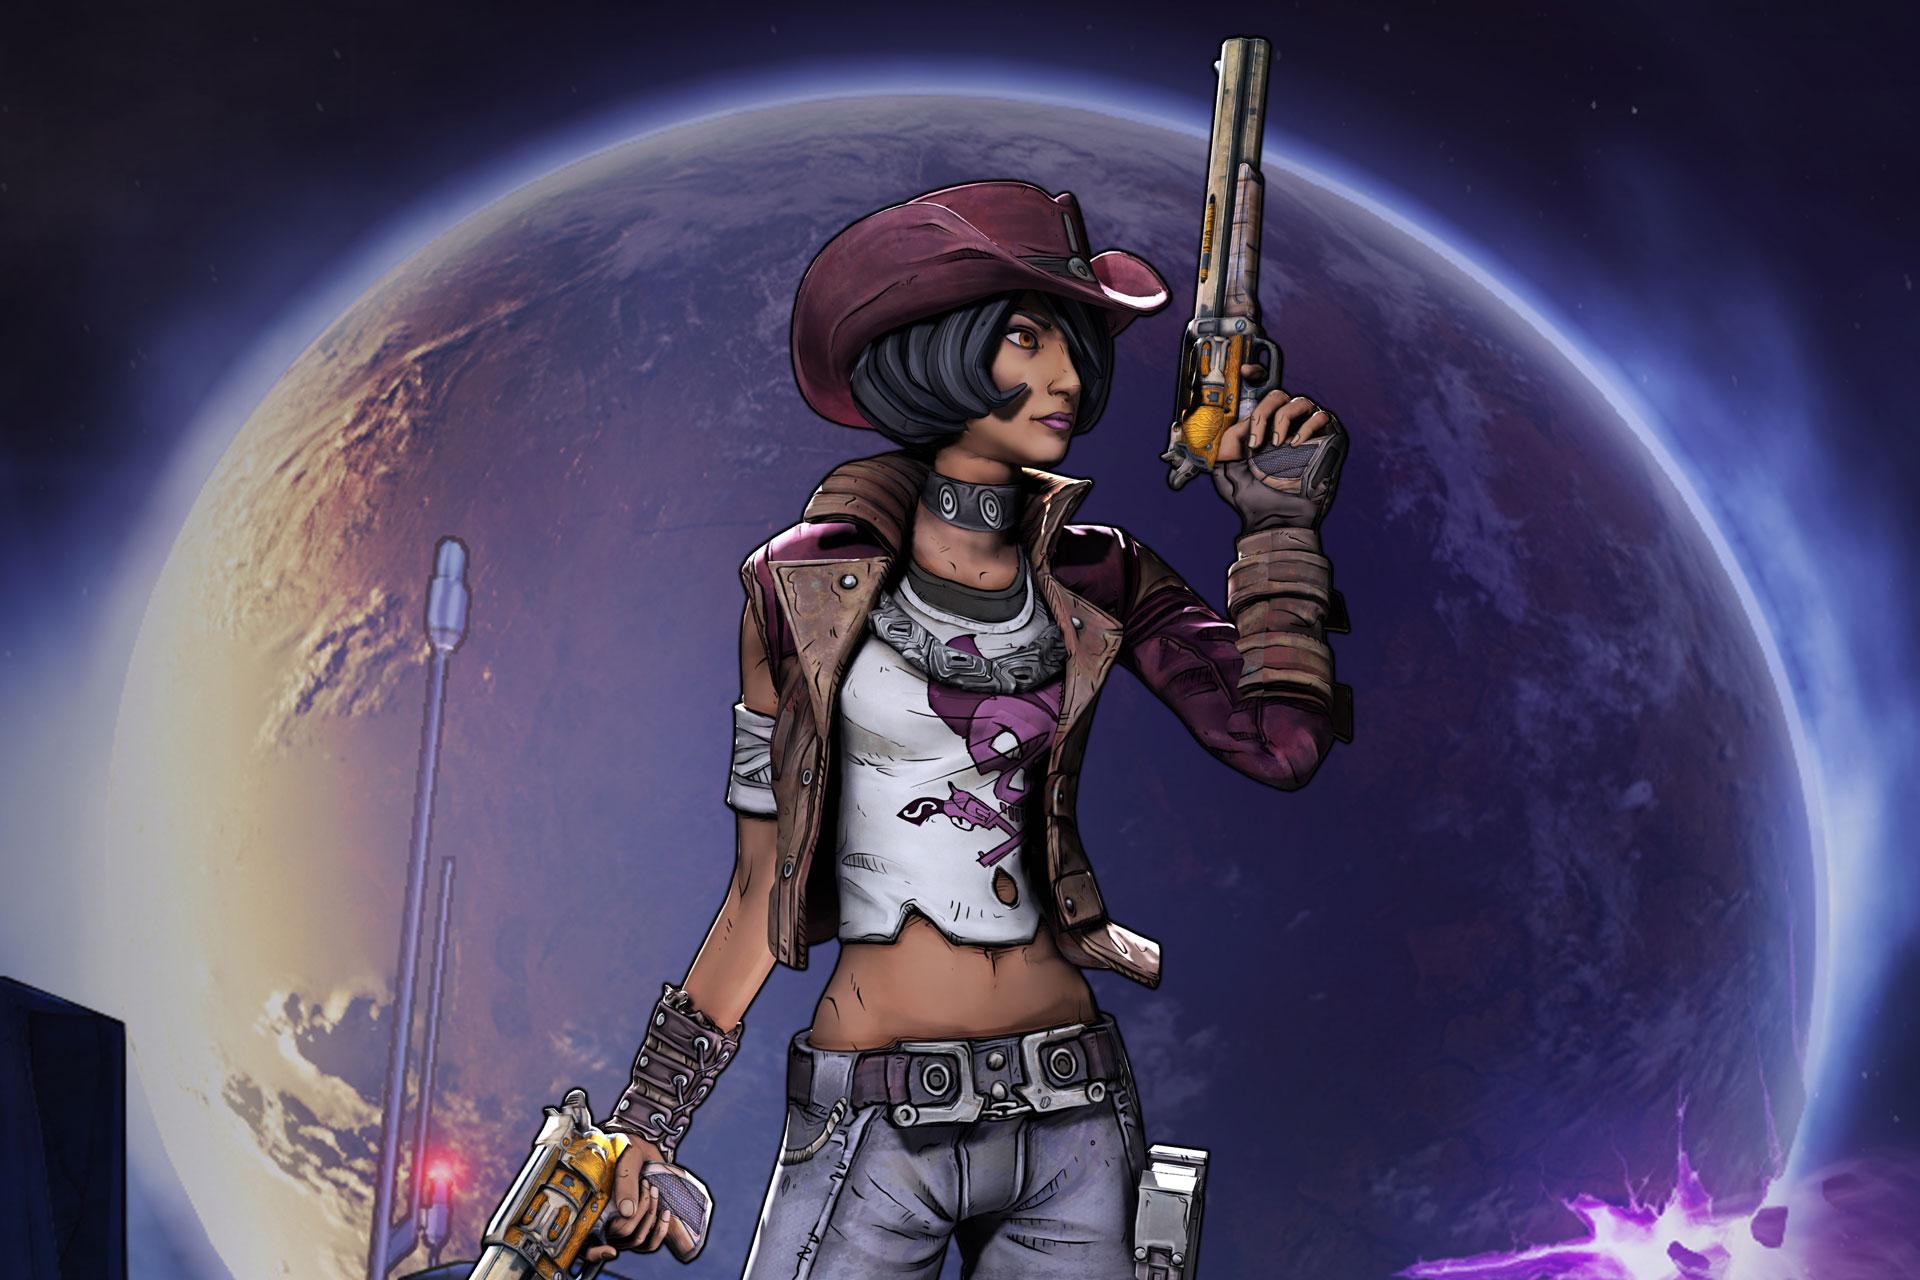 General 1920x1280 Borderlands: The Pre-Sequel Borderlands Nisha (Borderlands) video game characters girls with guns science fiction science fiction women video game girls PC gaming video games video game art belly bare midriff dark hair hat women with hats